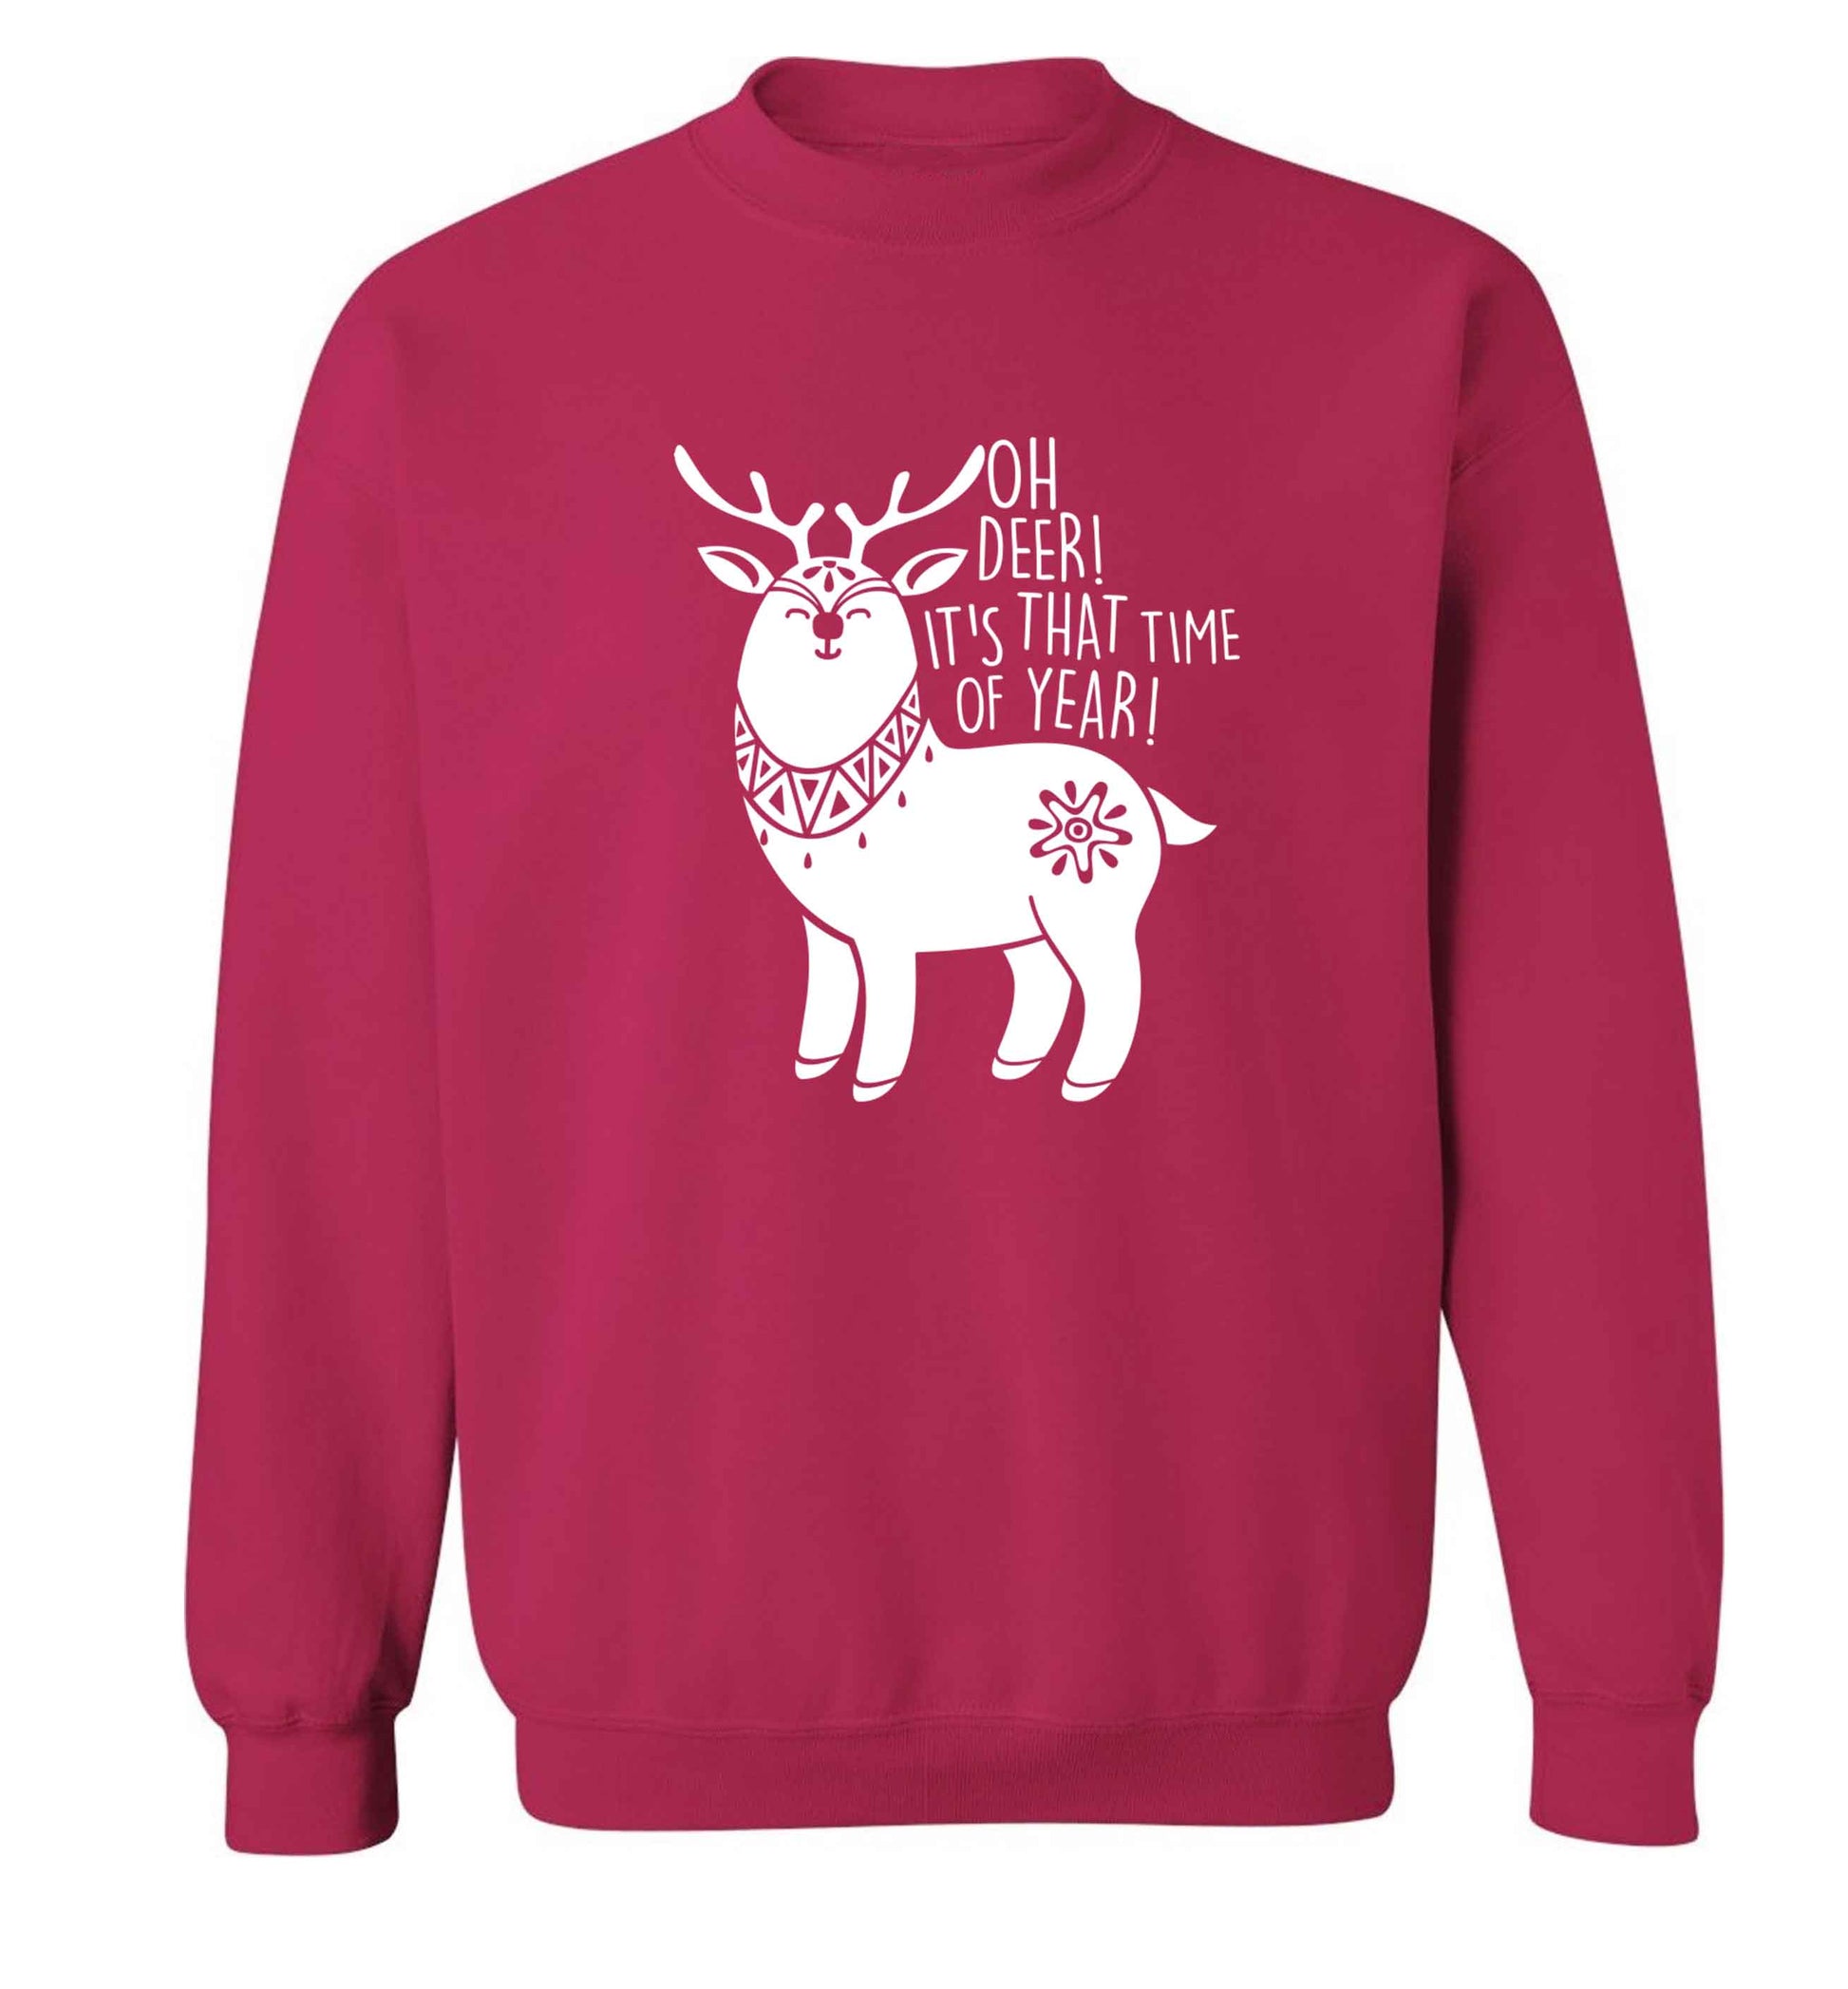 Oh dear it's that time of year Adult's unisex pink Sweater 2XL